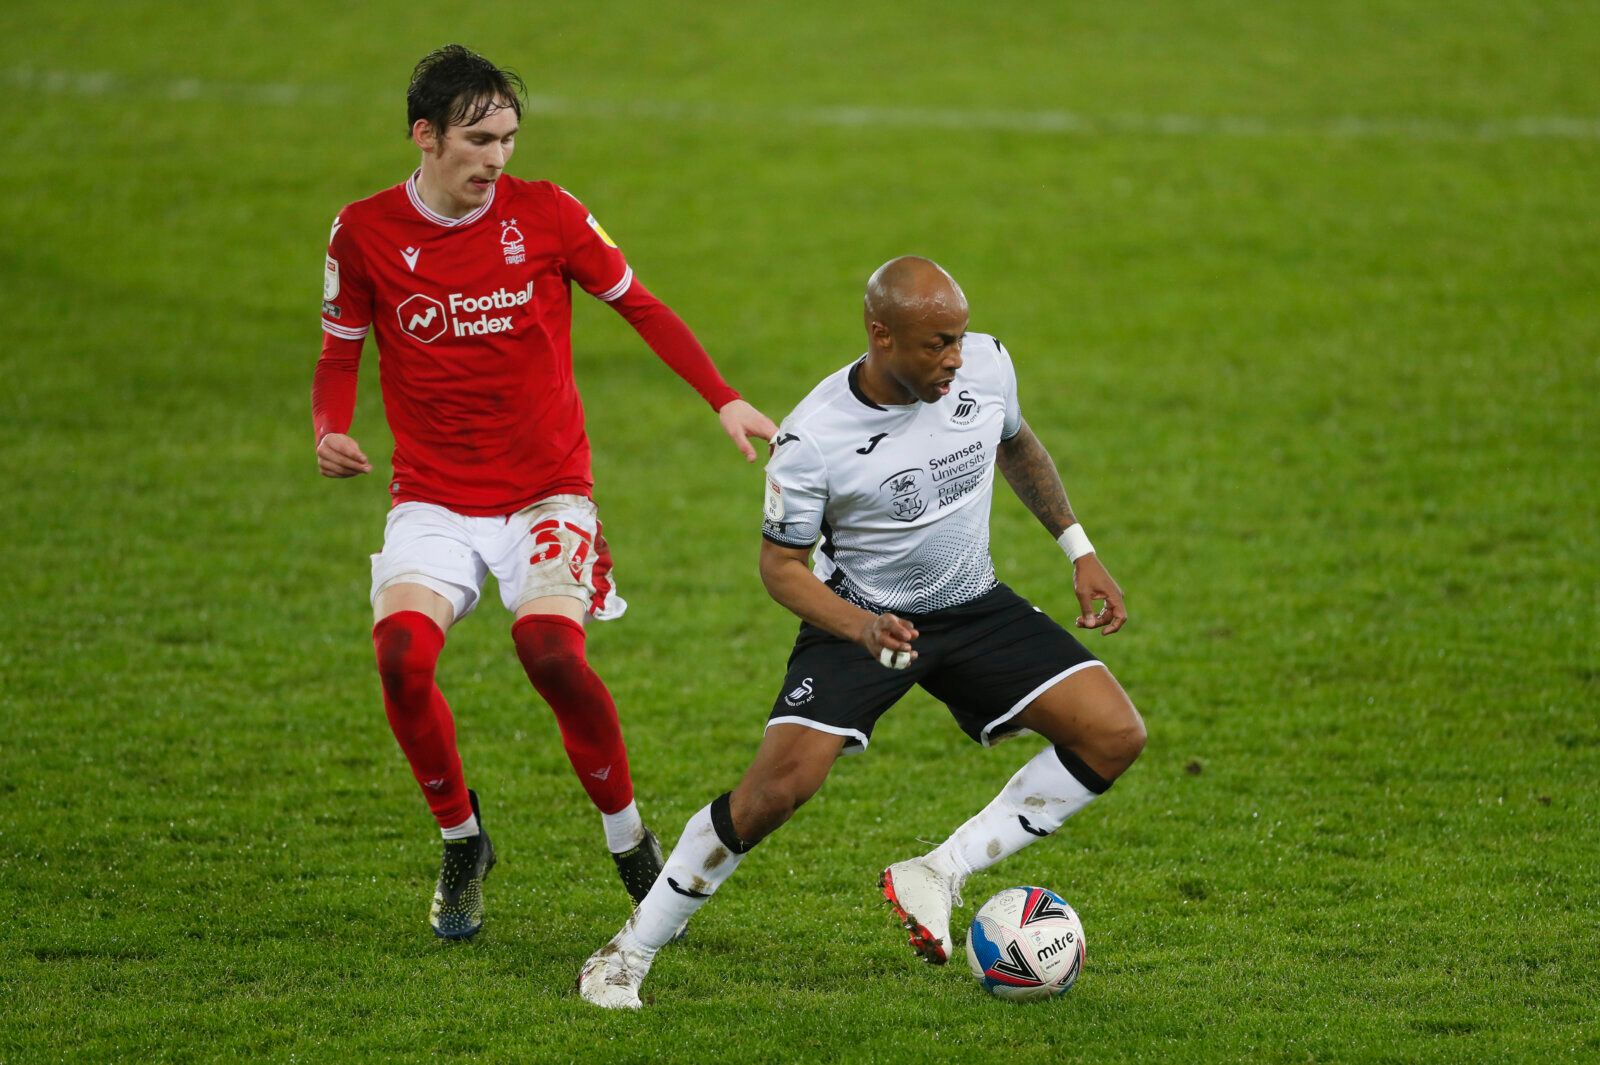 Soccer Football - Championship - Swansea City v Nottingham Forest - Liberty Stadium, Swansea, Wales, Britain - February 17, 2021 Swansea City's Andre Ayew in action with Nottingham Forest's James Garner Action Images/Matthew Childs EDITORIAL USE ONLY. No use with unauthorized audio, video, data, fixture lists, club/league logos or 'live' services. Online in-match use limited to 75 images, no video emulation. No use in betting, games or single club /league/player publications.  Please contact you